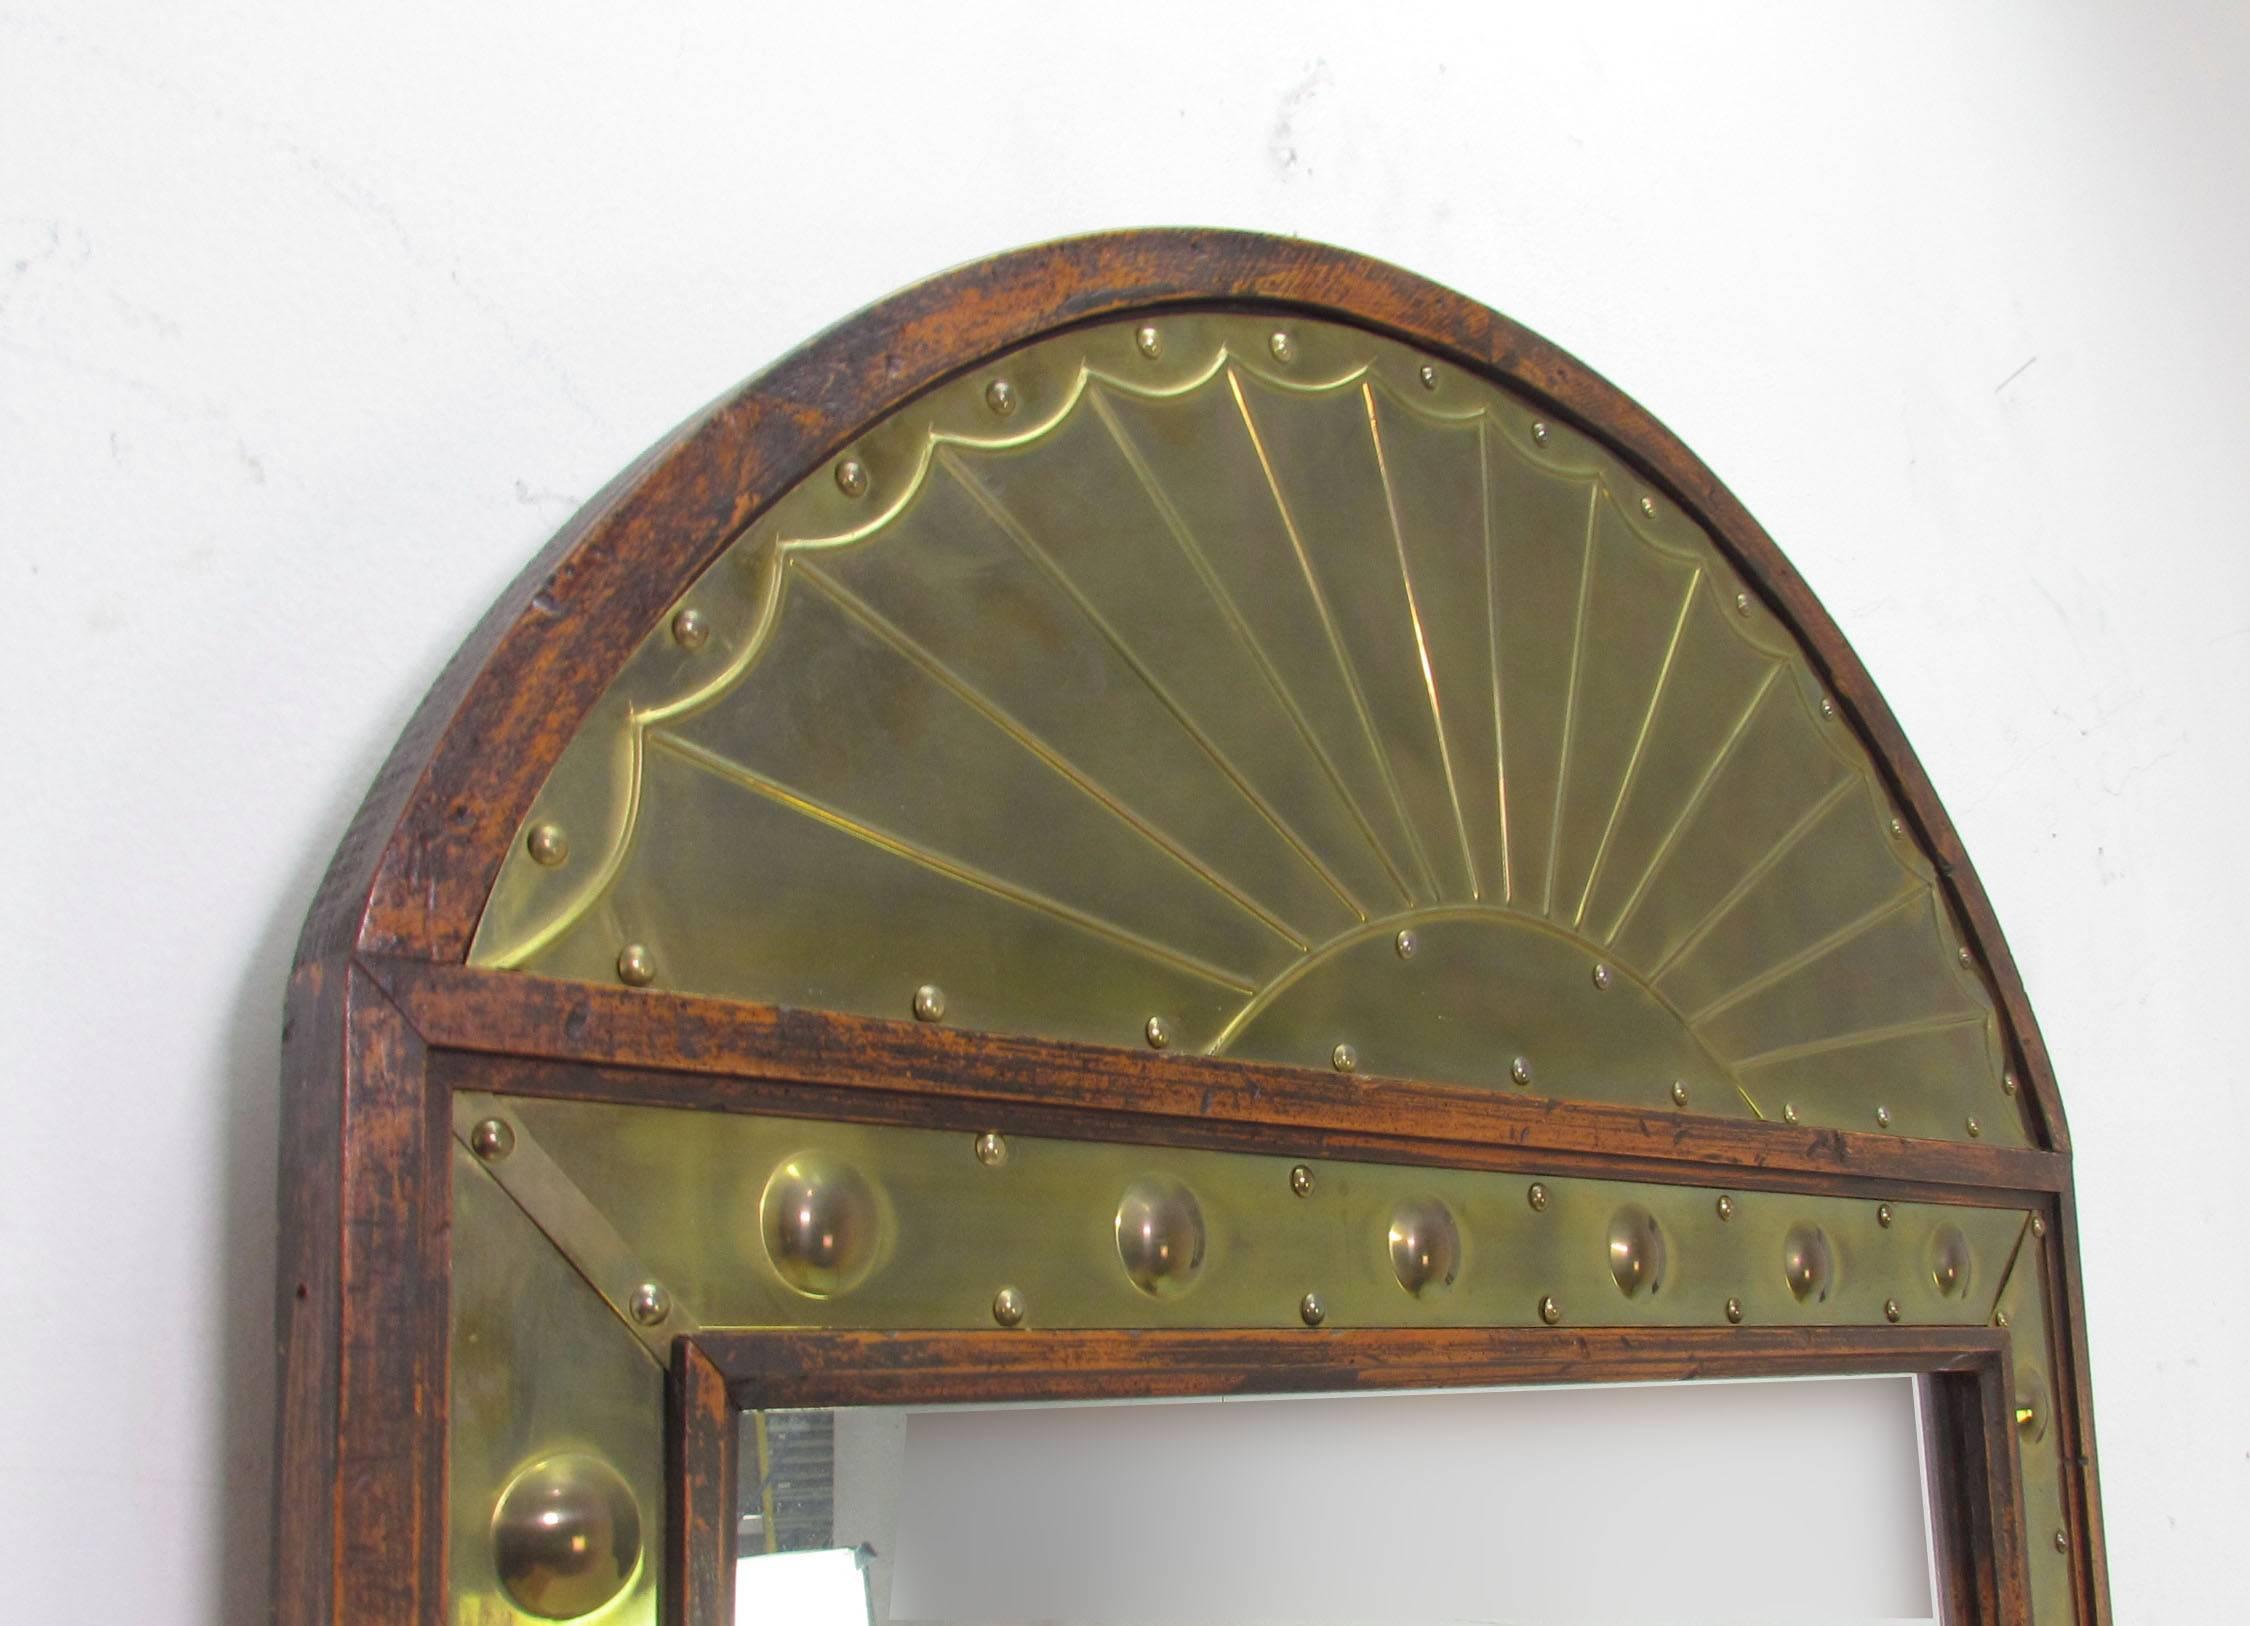 Hollywood Regency style wall mirror by Sarreid with brass repoussé panels set into a wooden frame. Made in Italy, circa 1970s.